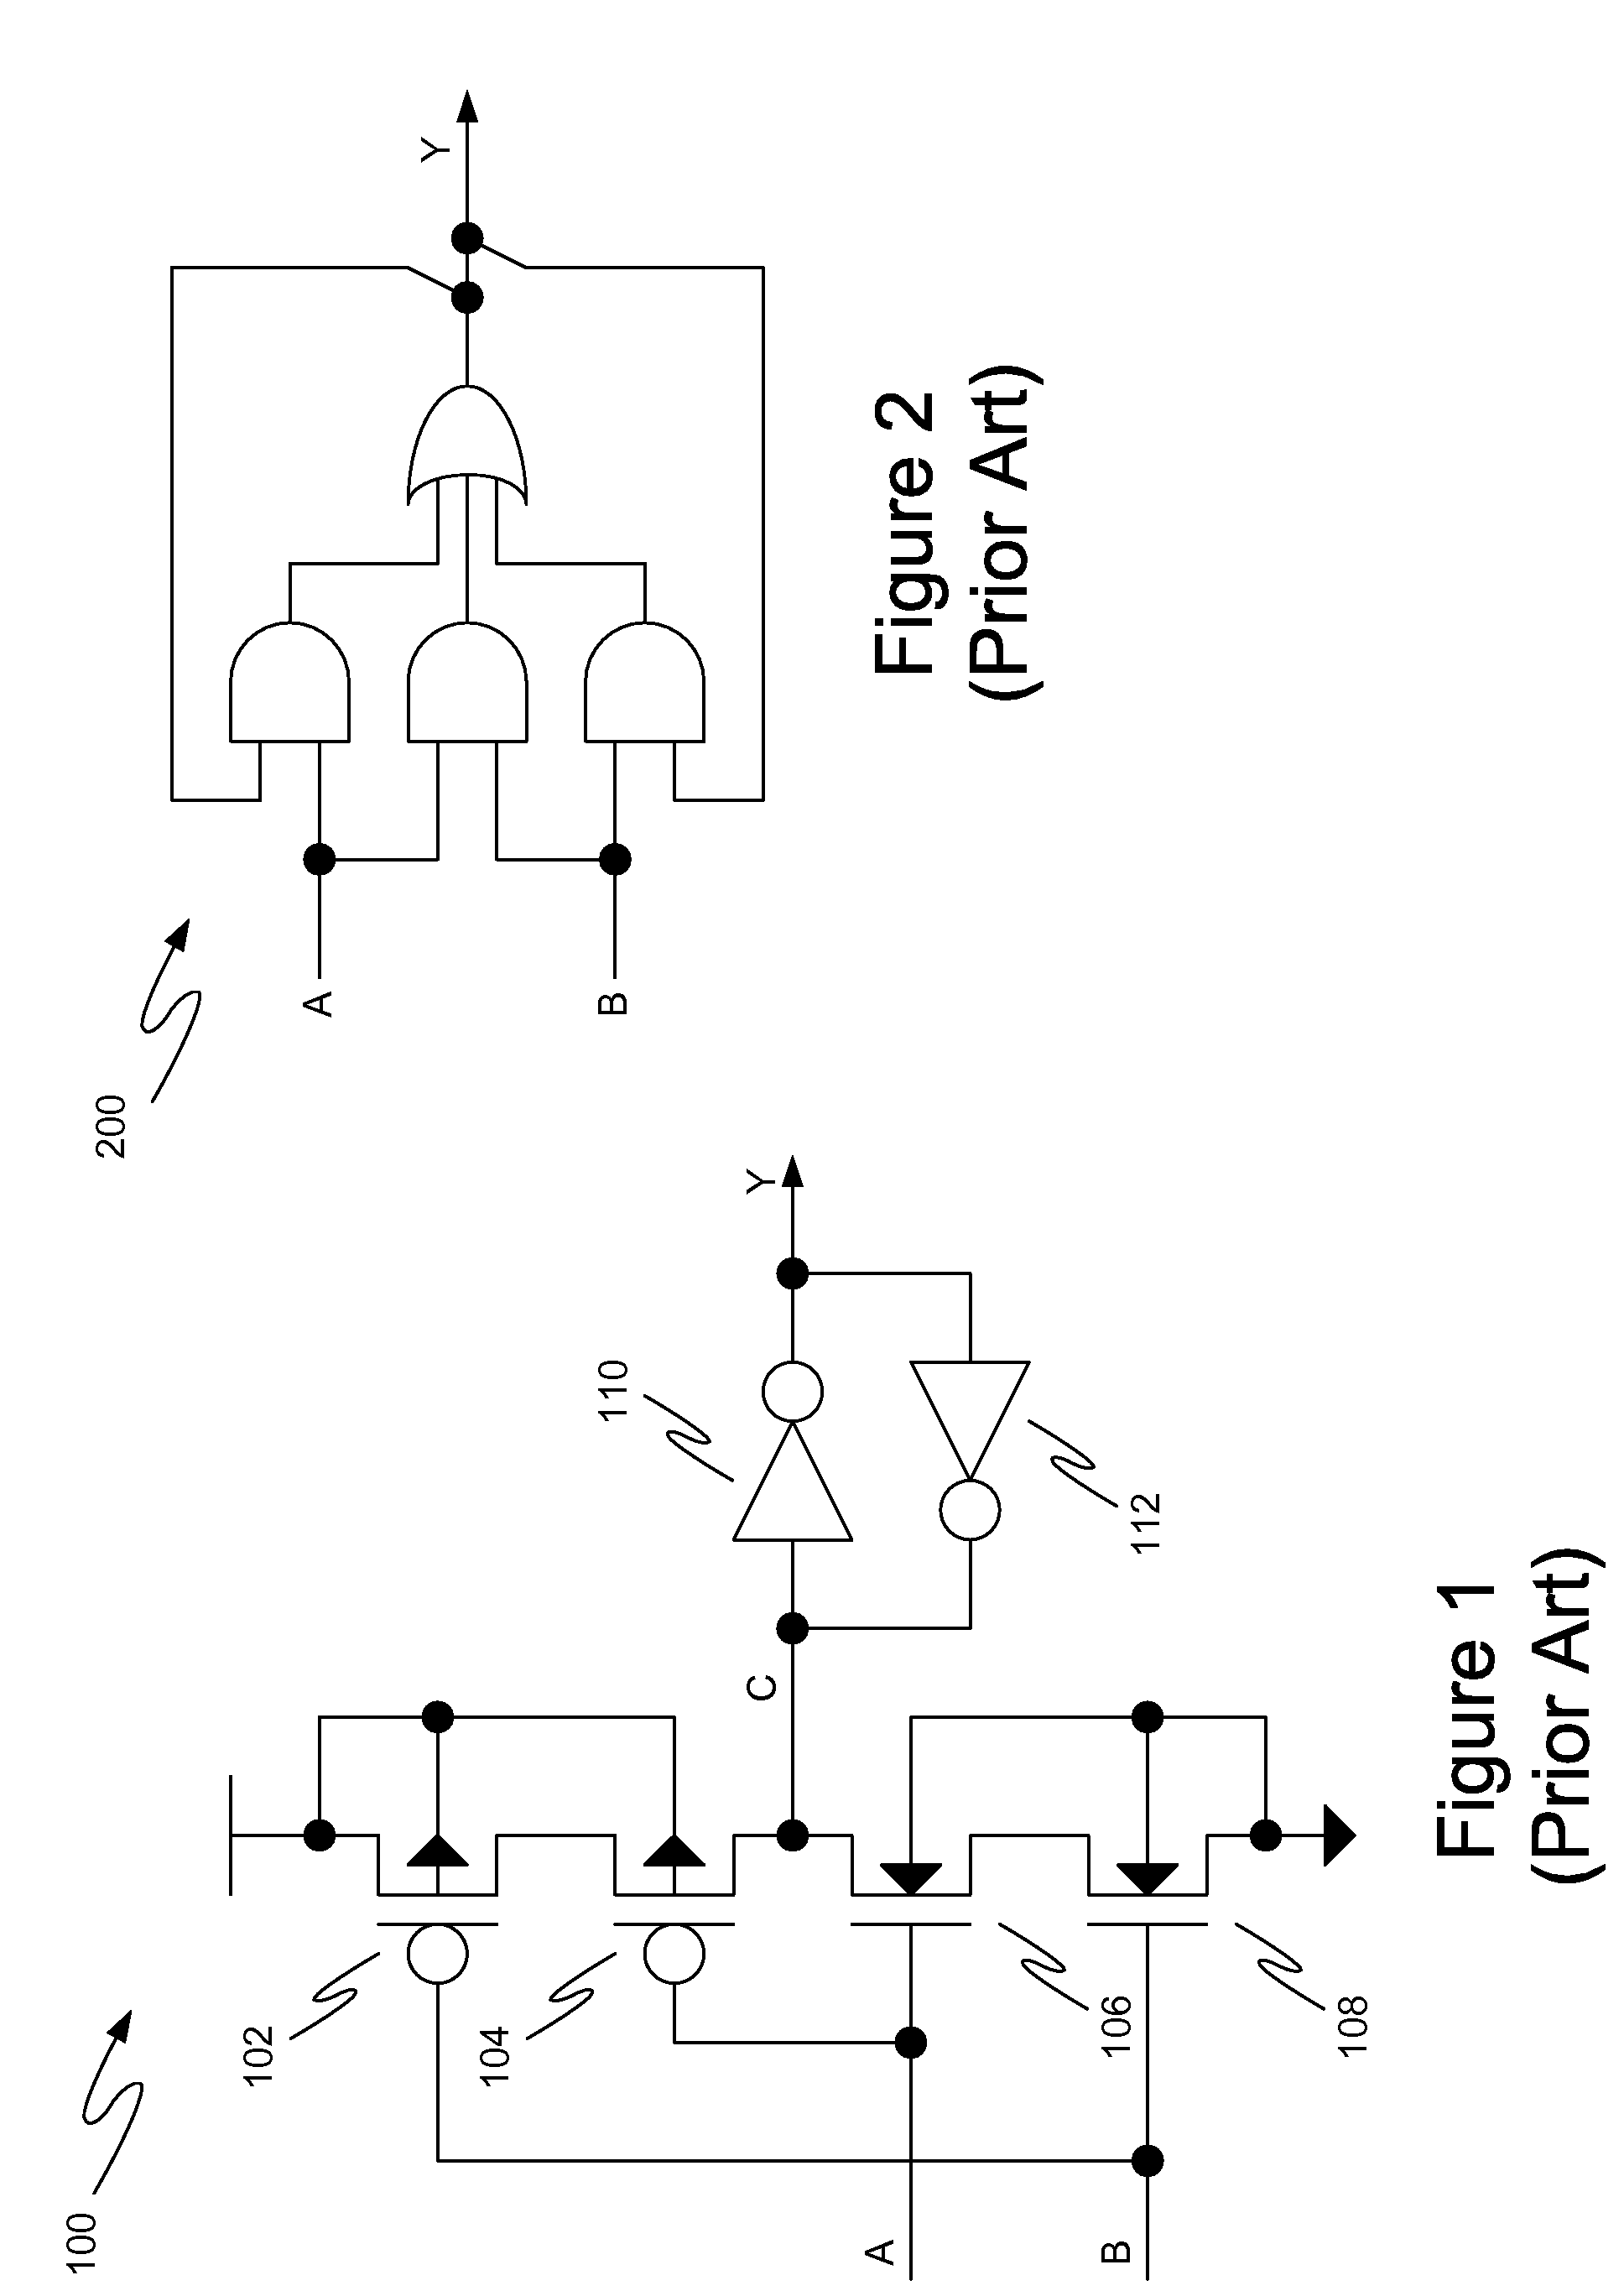 Single event transient mitigation and measurement in integrated circuits